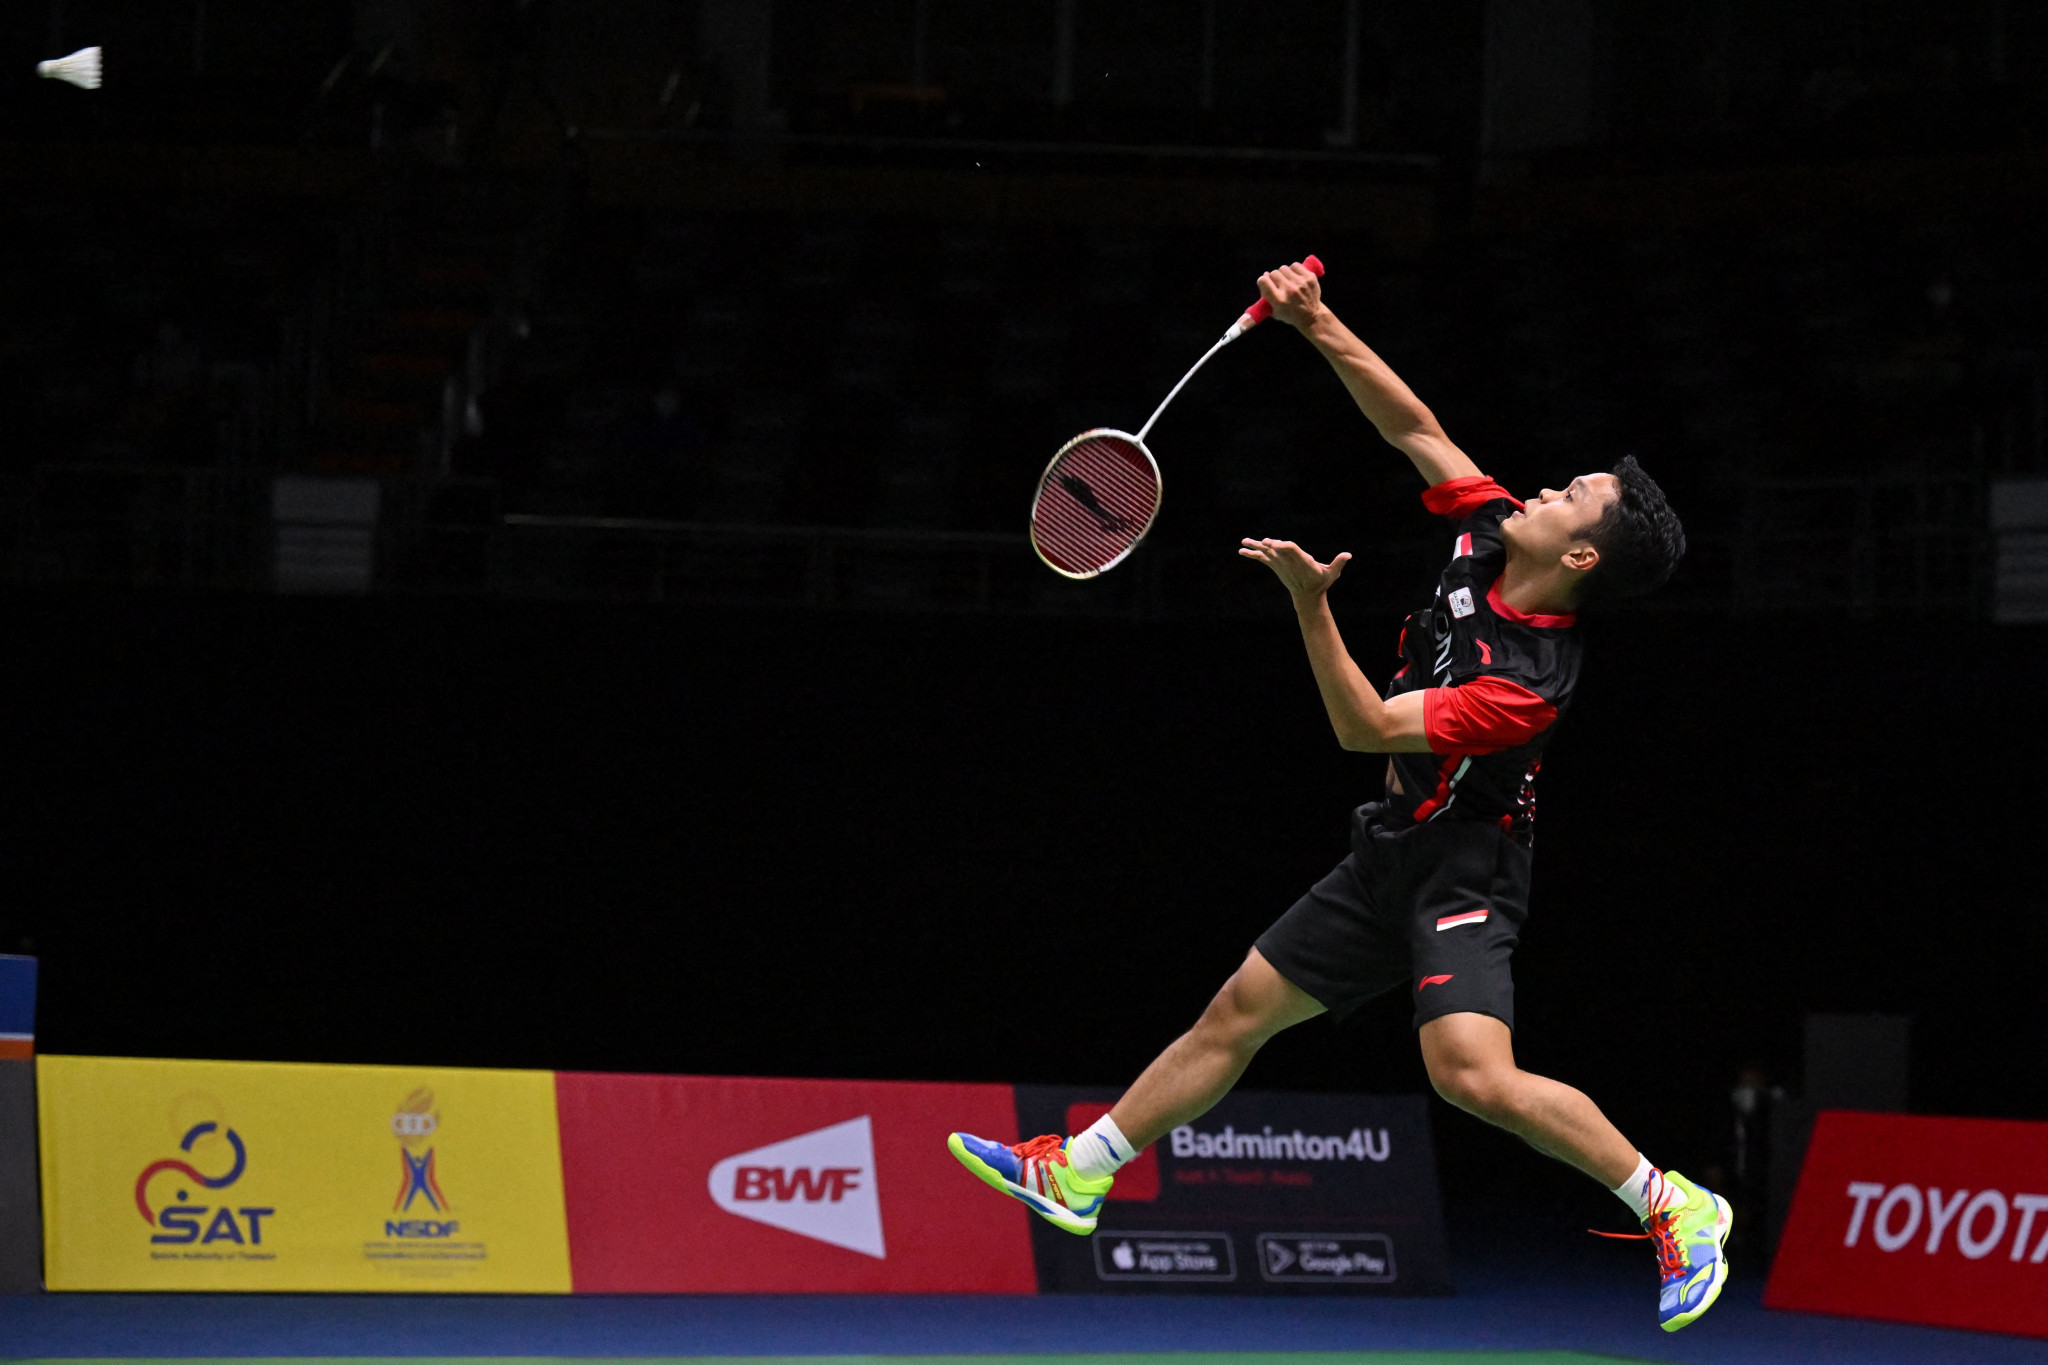 Indonesia beat China to reach the Thomas Cup semi-finals ©Getty Images